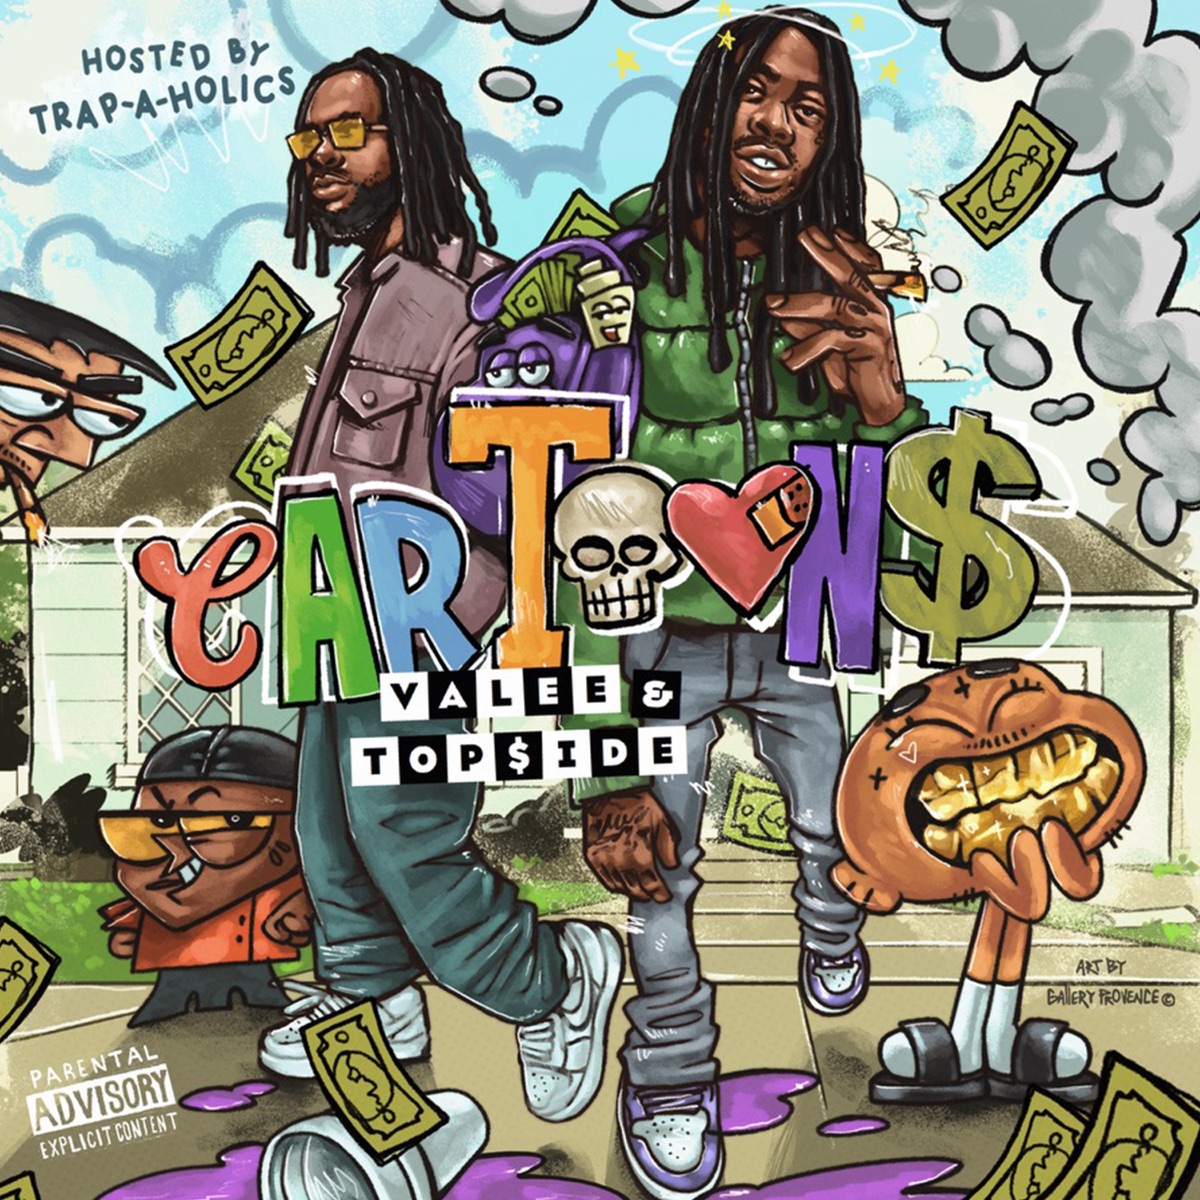 Valee, Top$ide & Trap-A-Holics Ft. King Hendrick$ – Last Song In The Trap